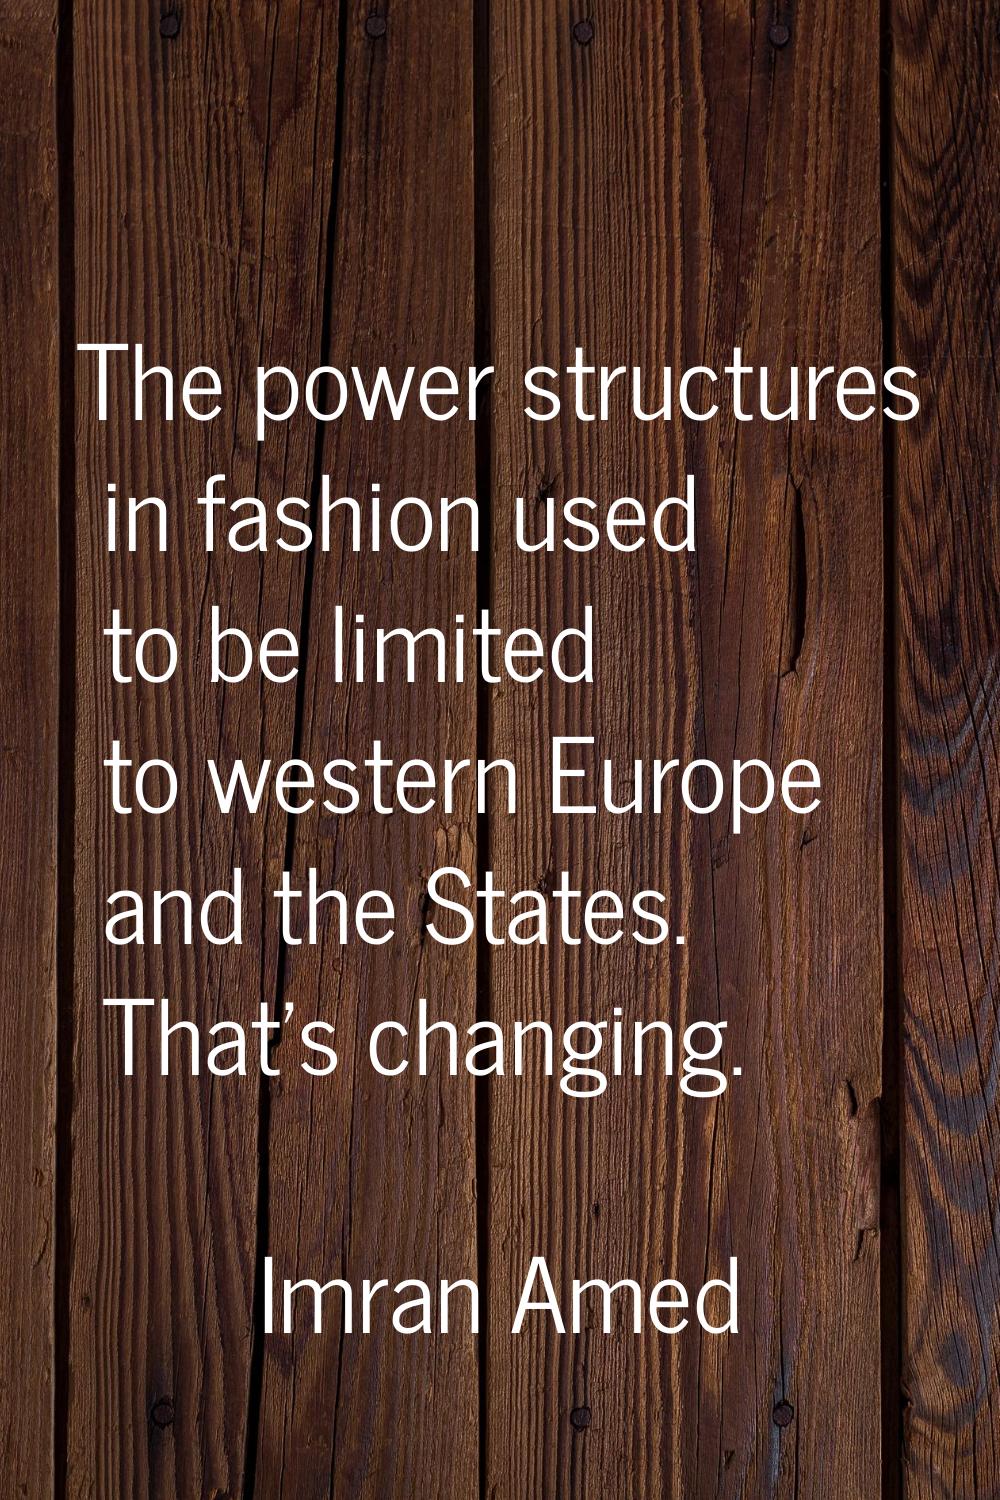 The power structures in fashion used to be limited to western Europe and the States. That's changin